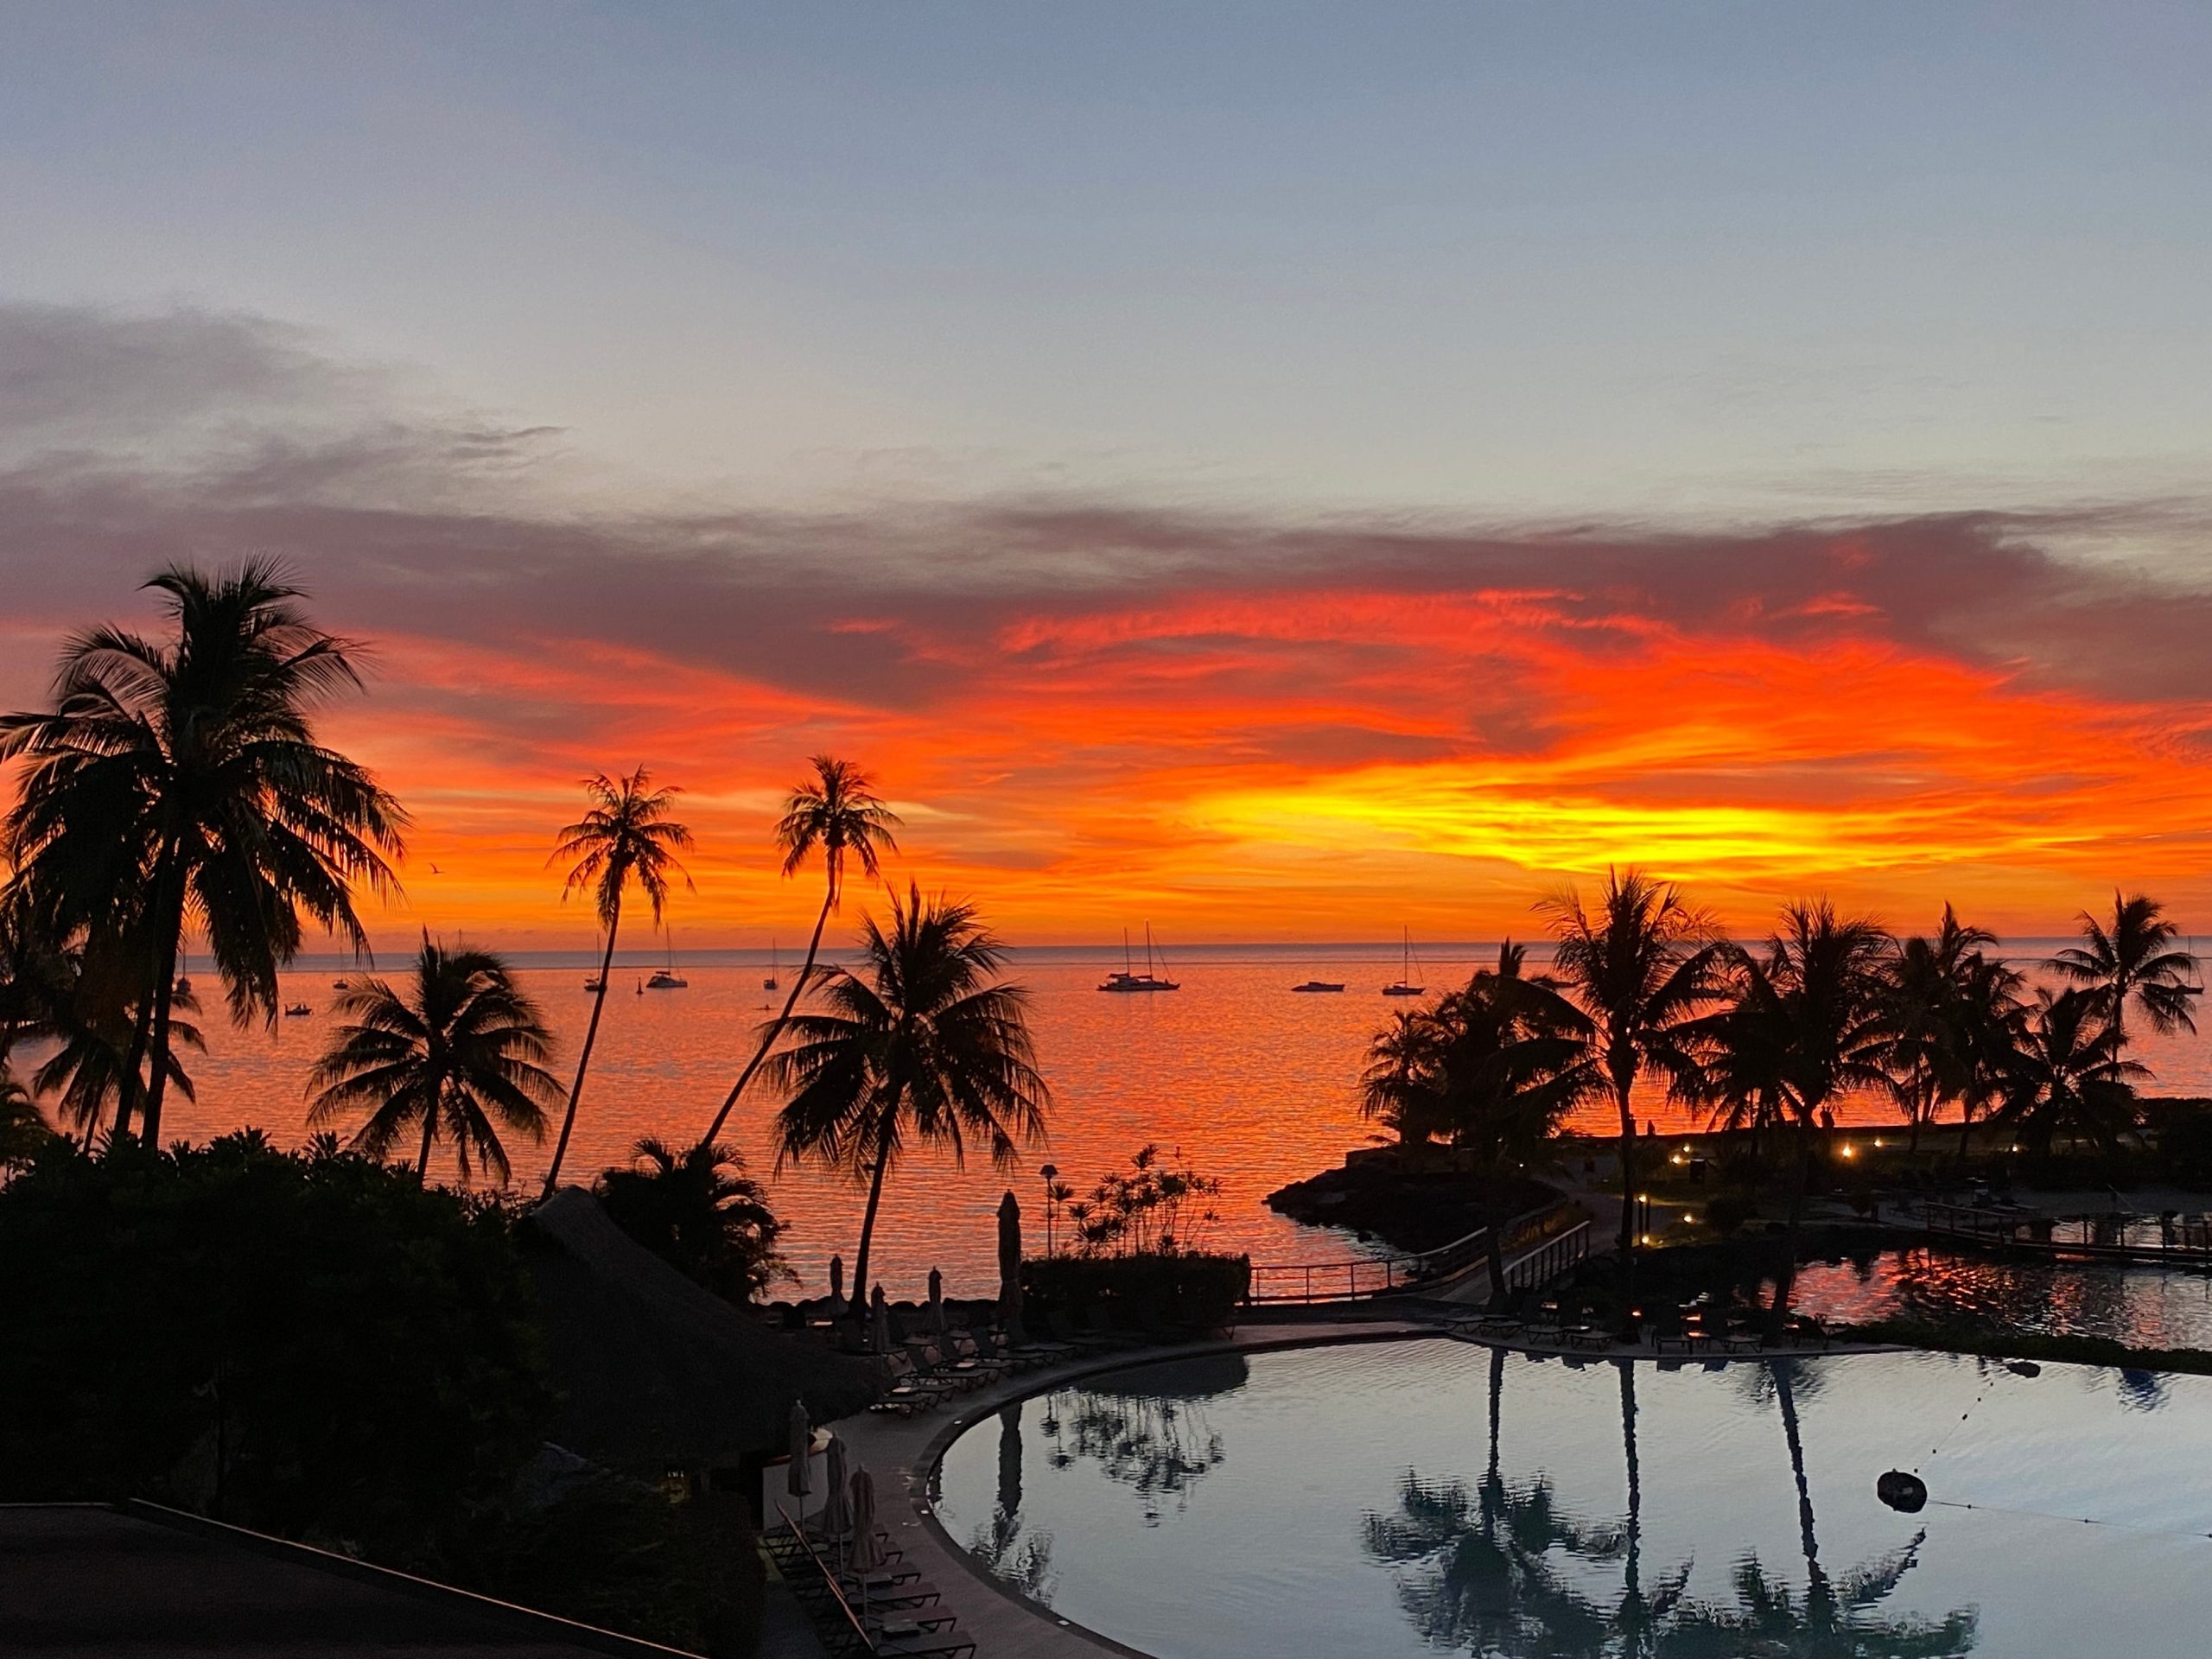 A sunset over the pool and beach at the InterContinental Tahiti Resort & Spa.